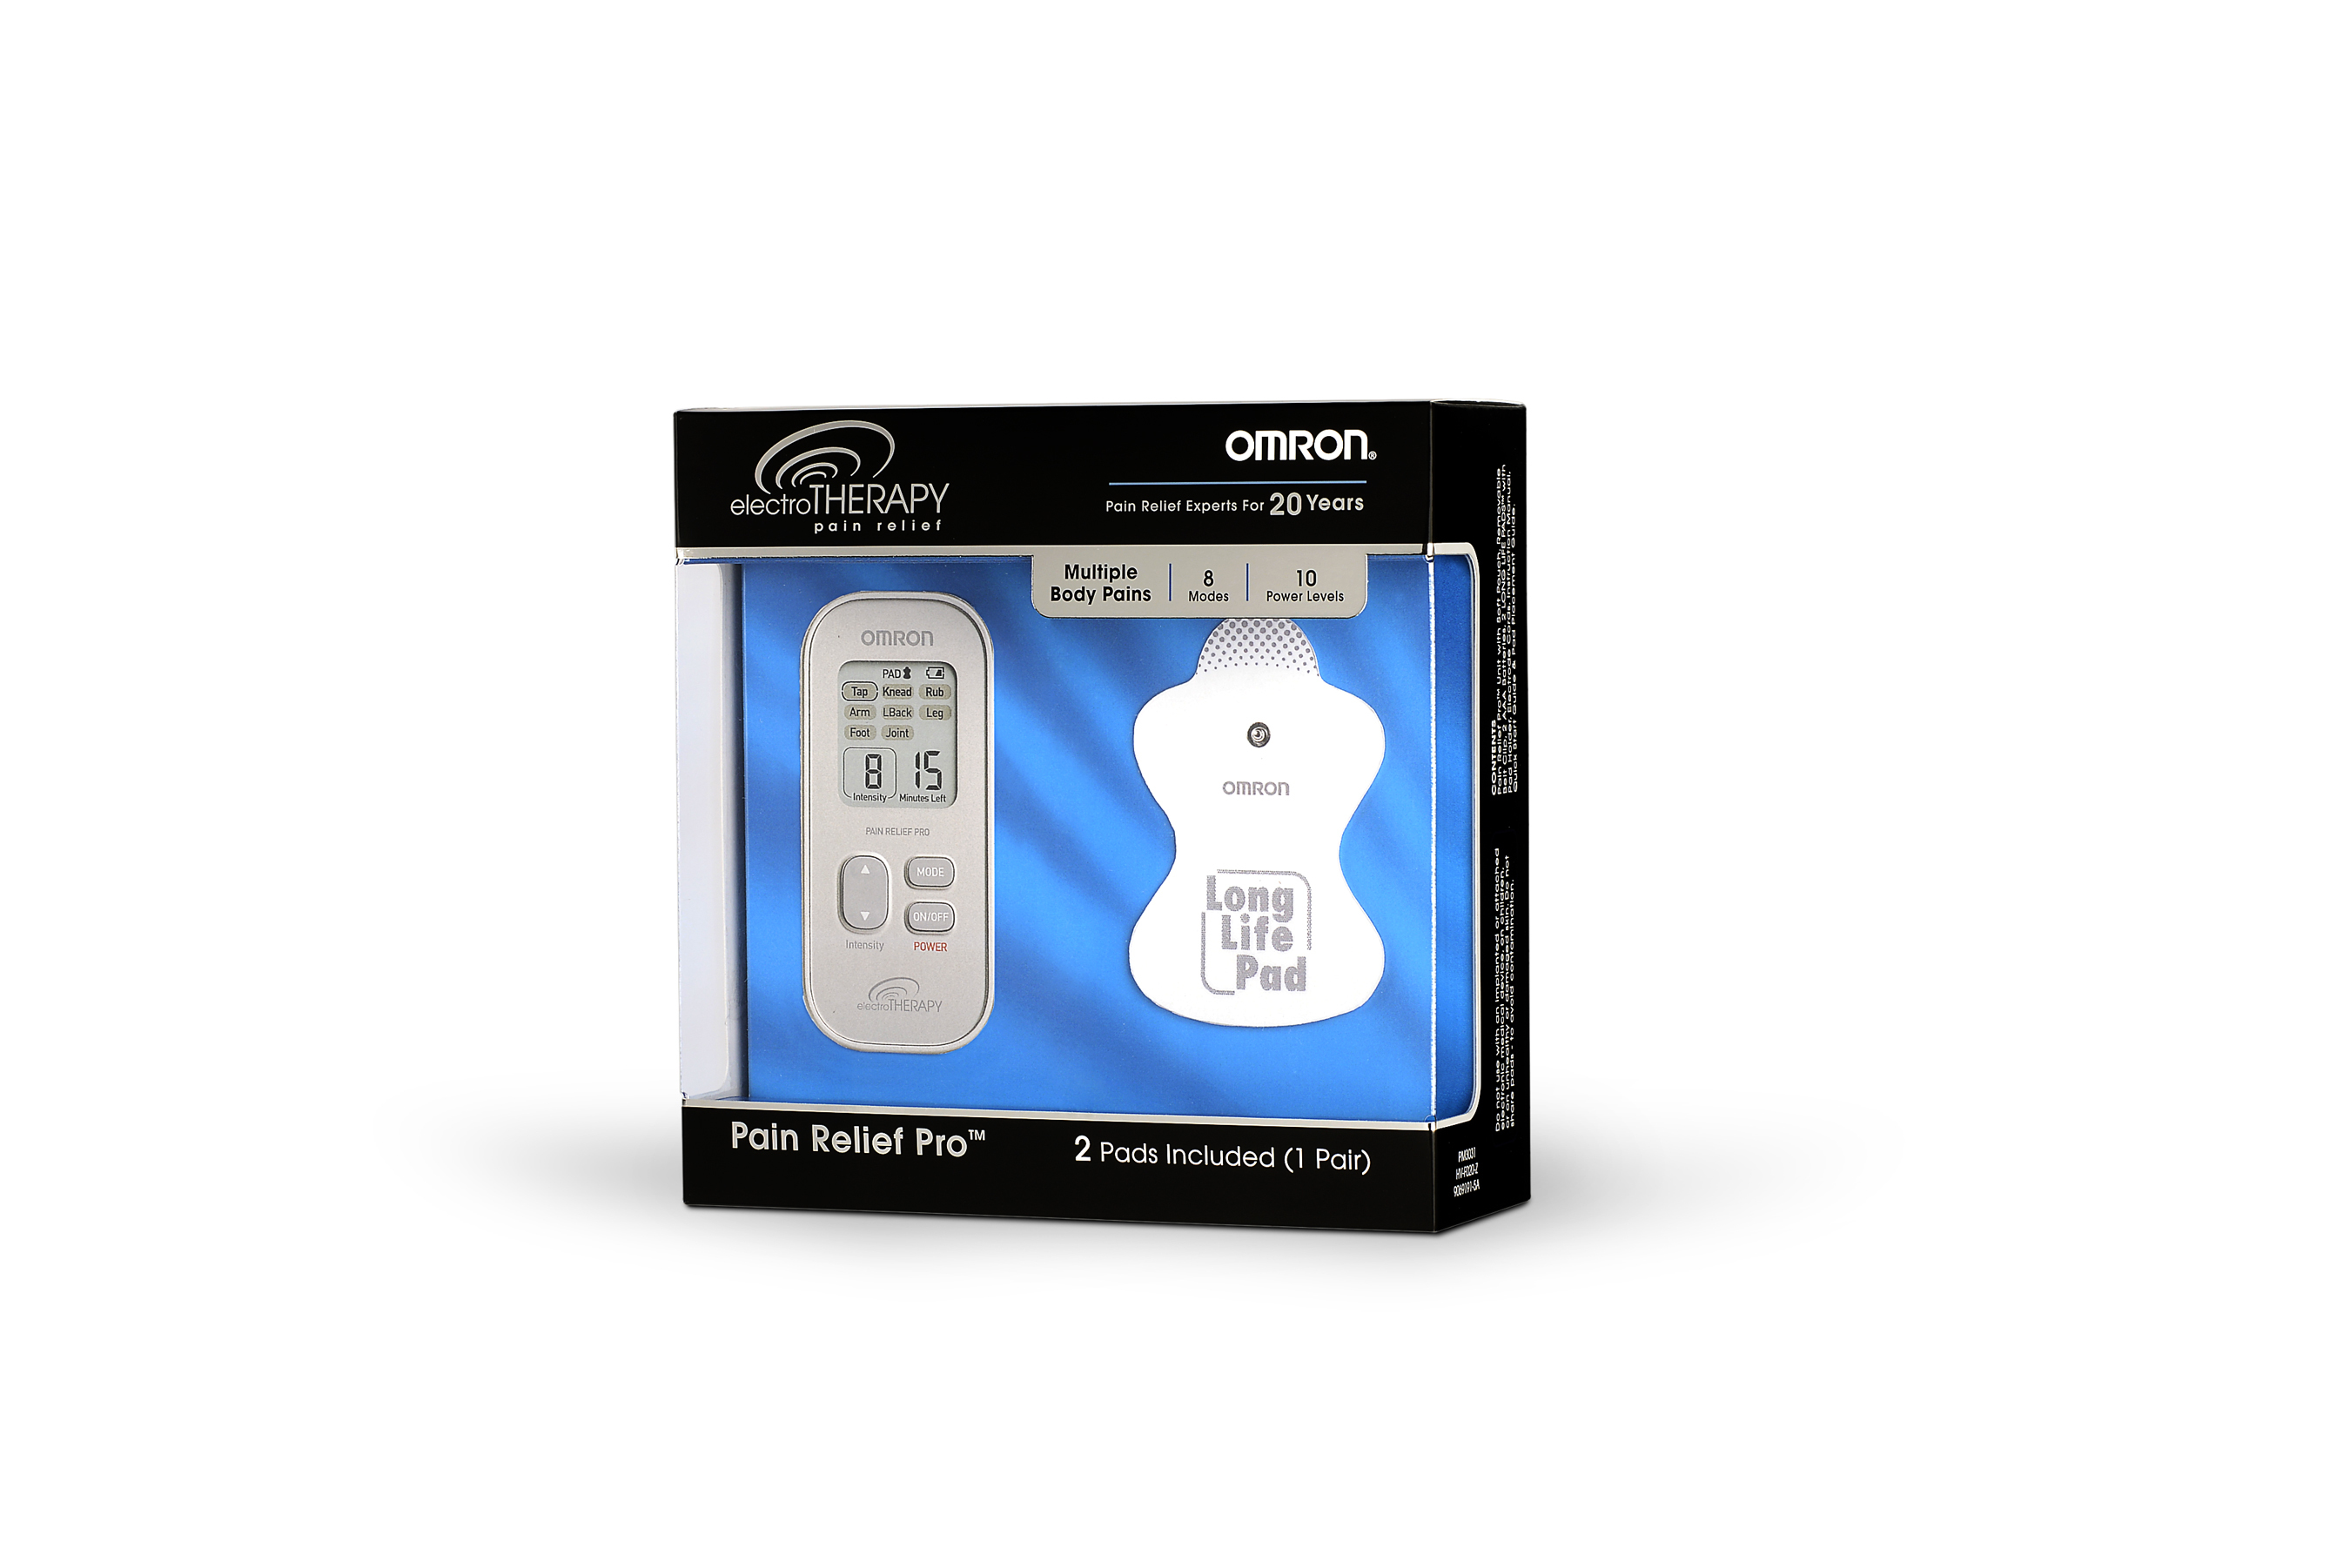 Omron Pain Relief Pro TENS - A personal TENS unit for multiple